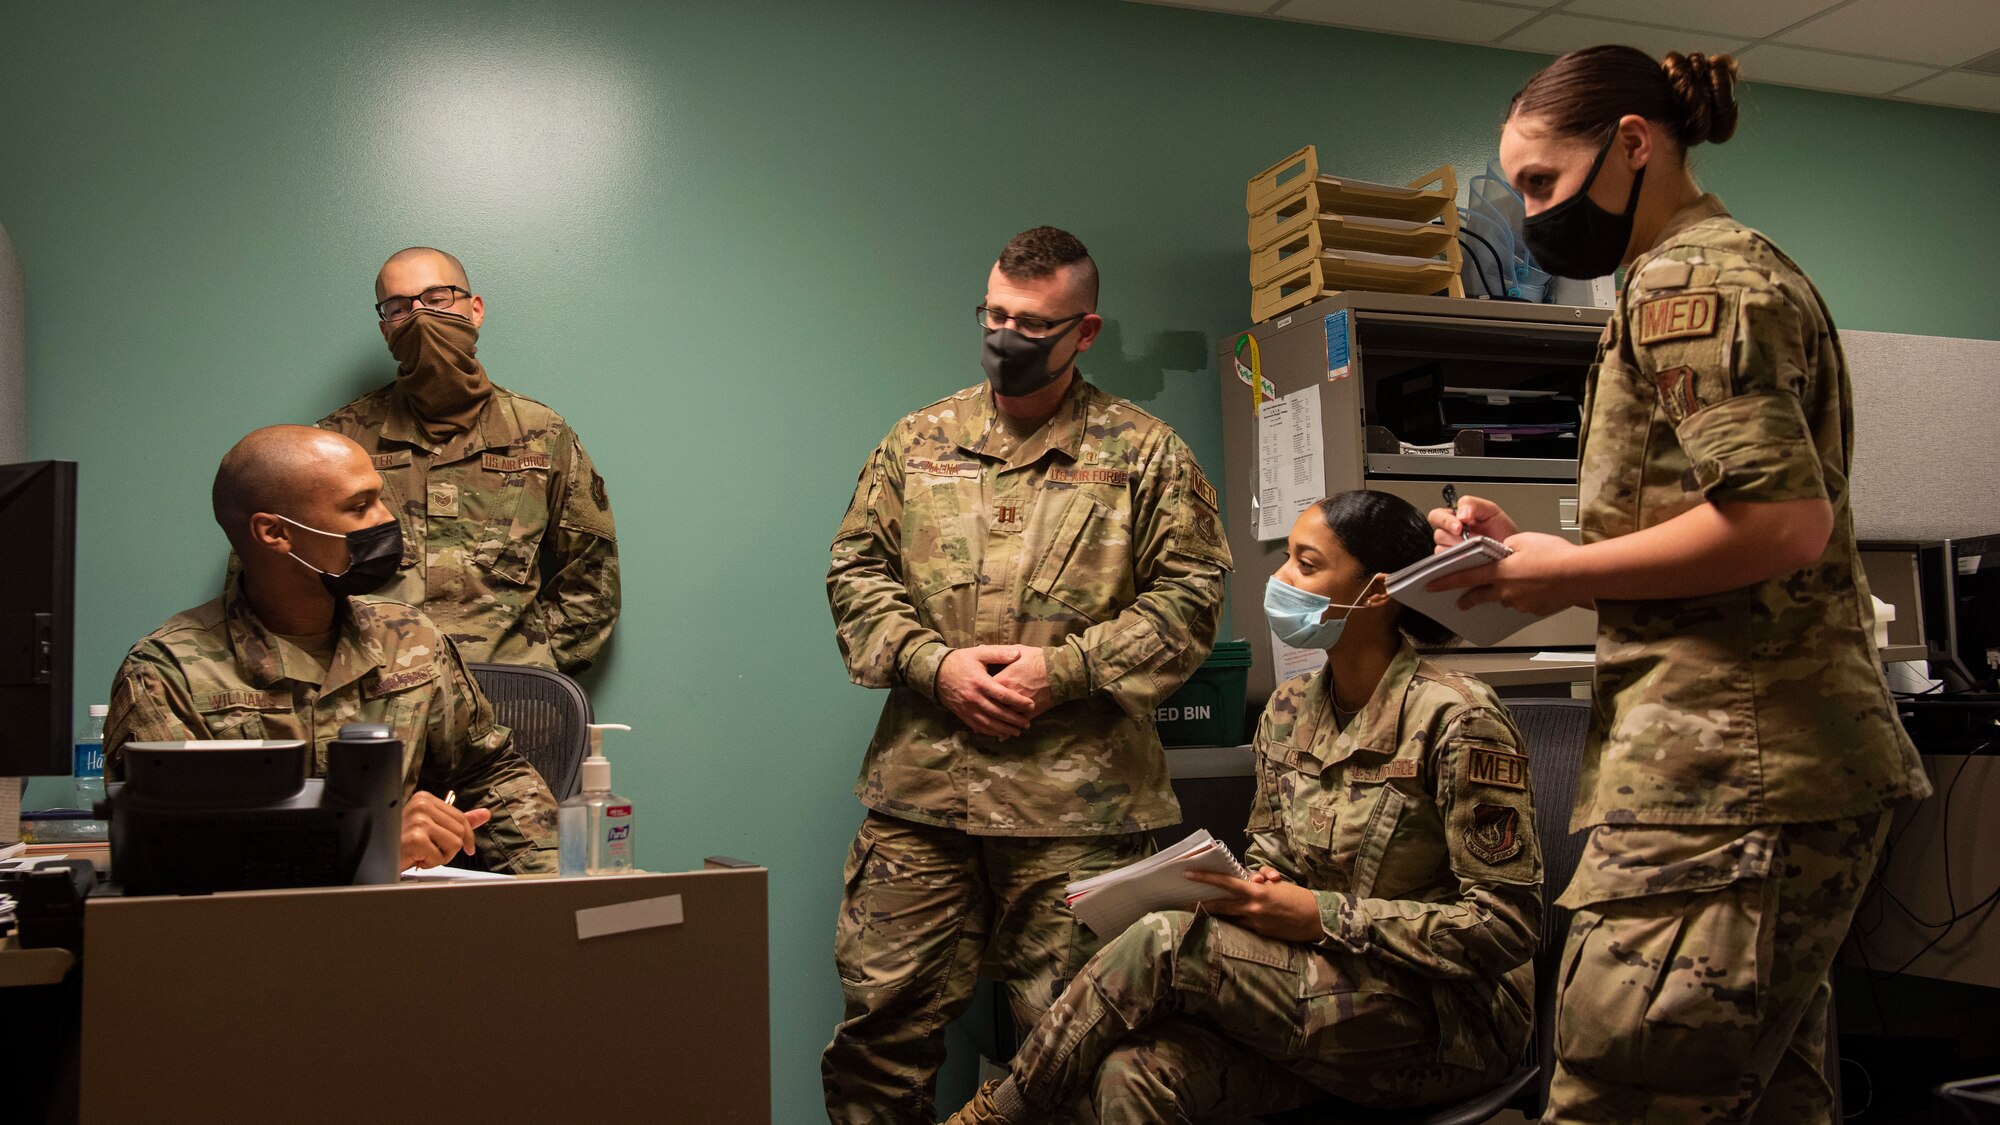 Airmen from 36th Medical Group Mental Health Flight converse during a meeting in their headquarters at Andersen Air Force Base, Guam, Jan. 28, 2021. During the last week of January, members of Andersen AFB recognized all the hard work done by Airmen in the Biomedical Science Corps in honor of the 56th Annual Biomedical Science Corps Appreciation Week. (U.S. Air Force photo by Senior Airman Aubree Owens)